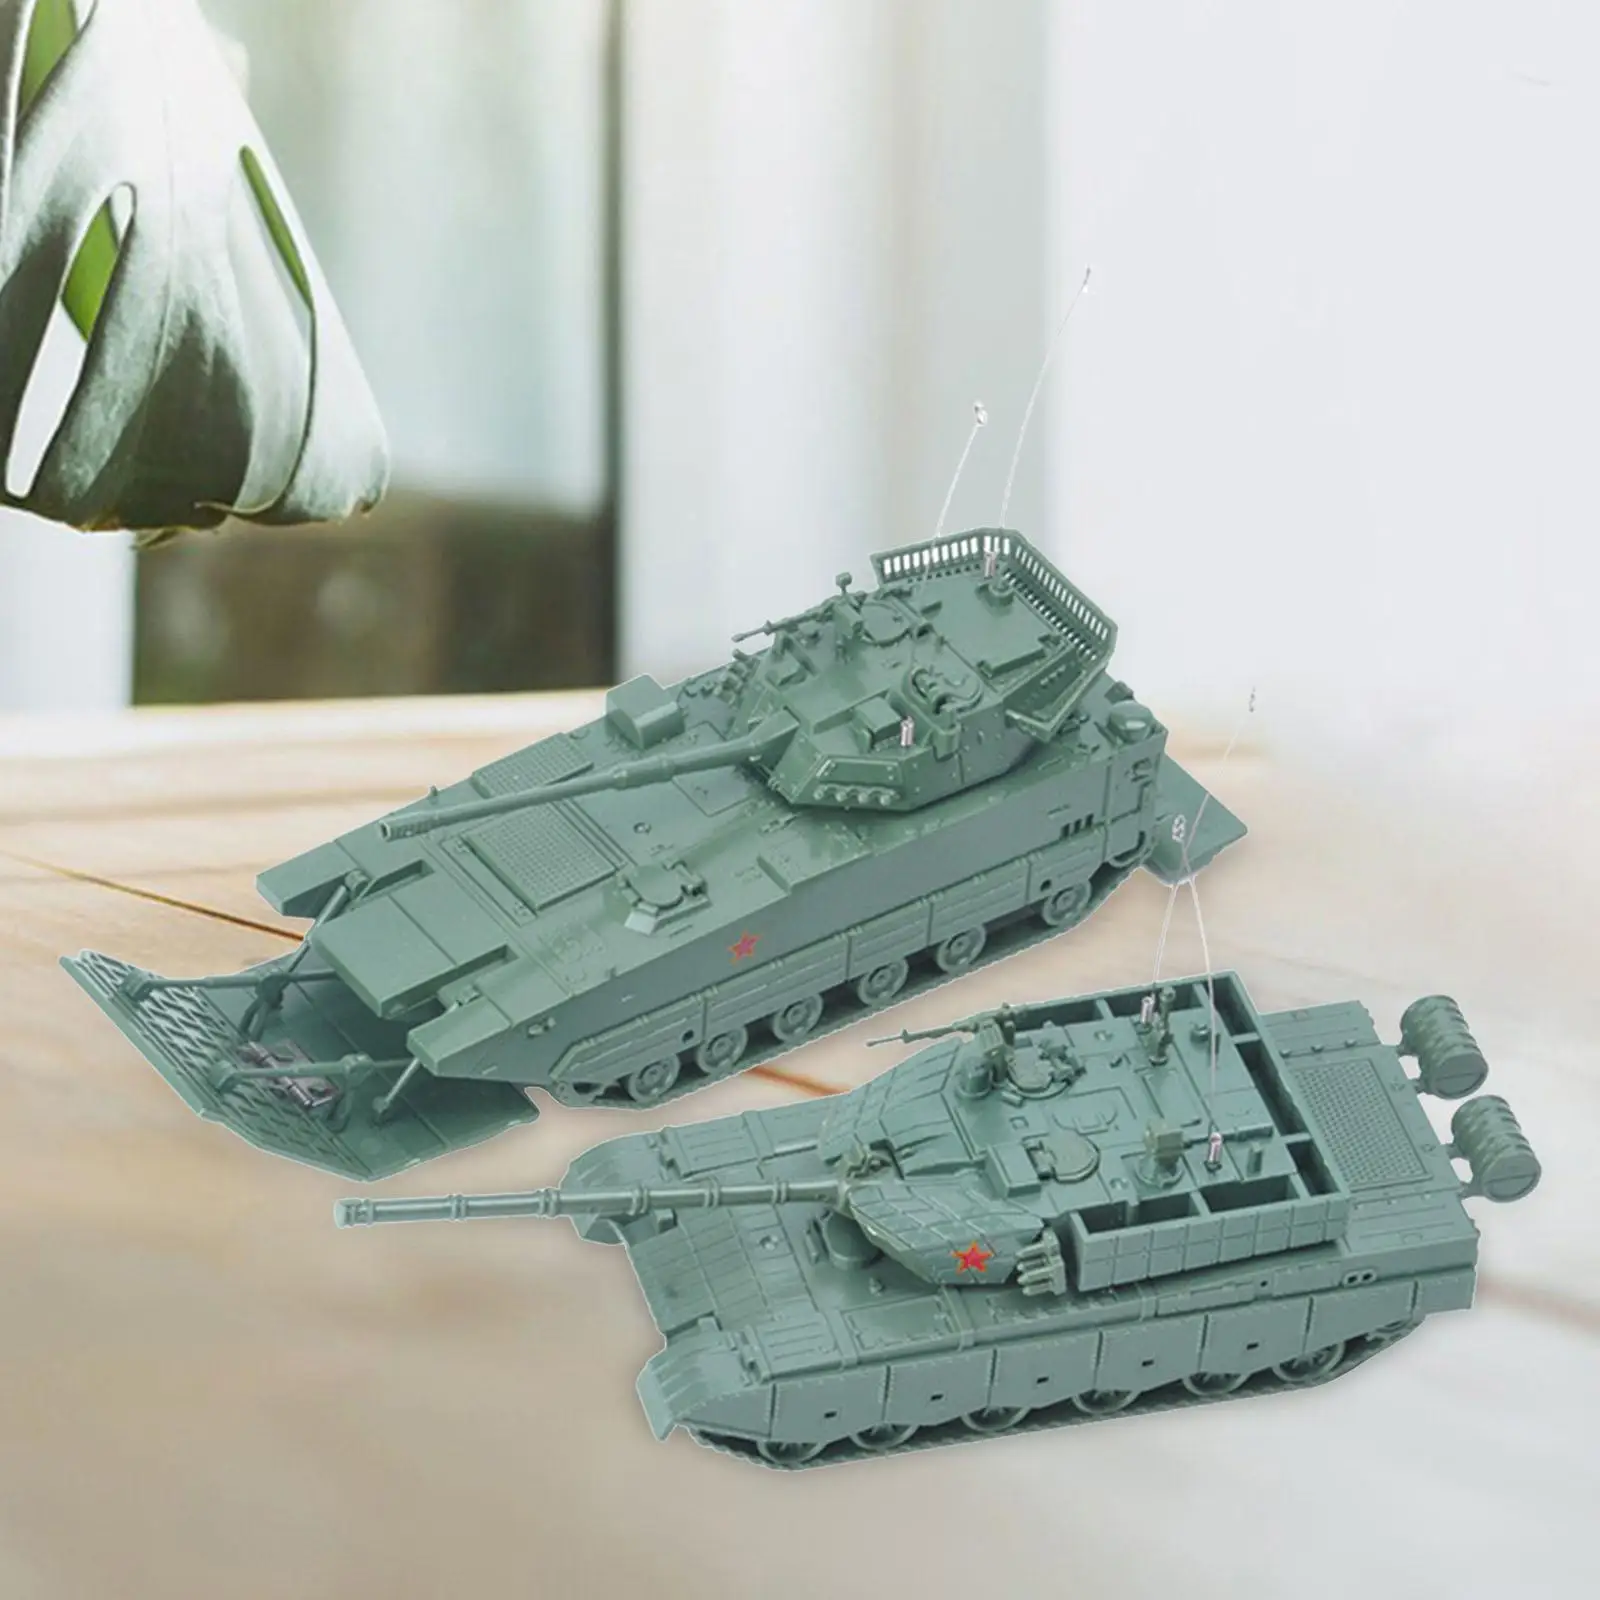 2x 1/72 Vehicles Model Set Armored Car Model Toy Tank set DIY Puzzle Educational Toy for Game Gift Holiday Birthday Party